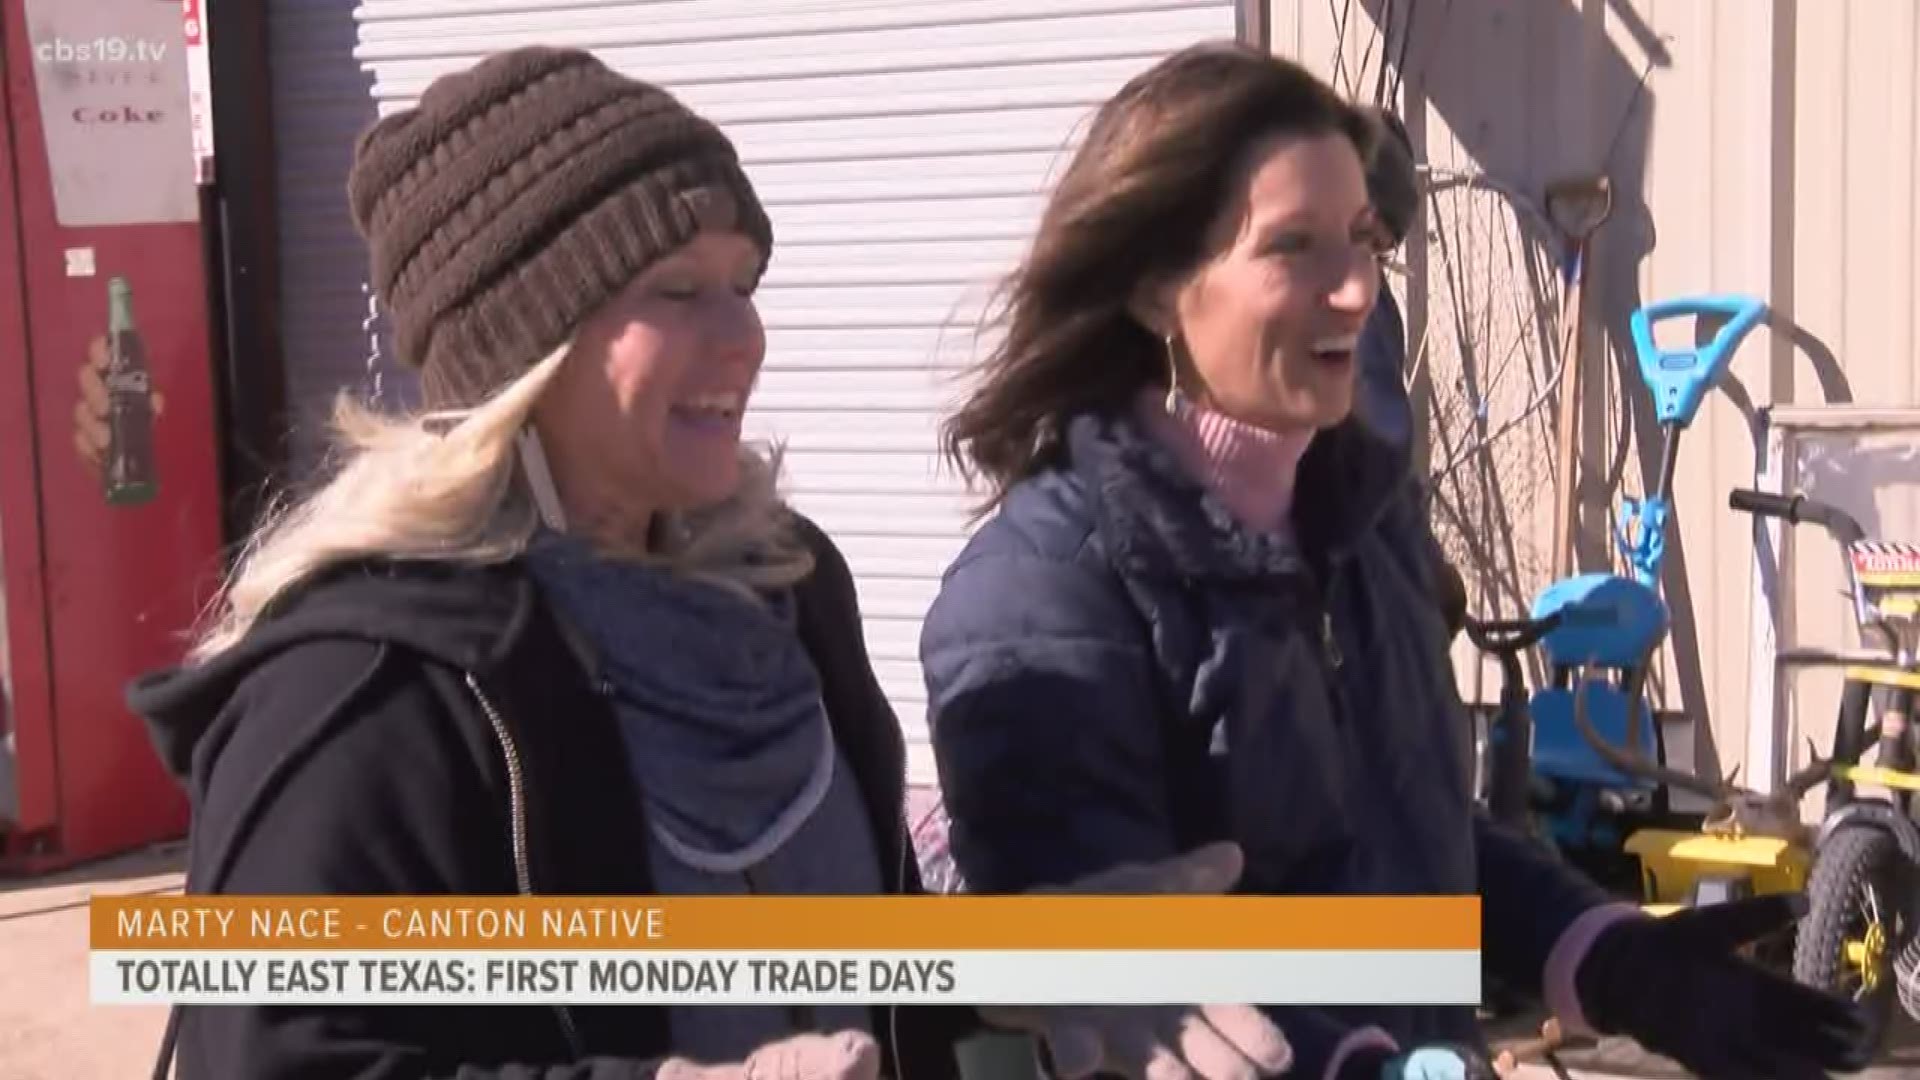 Few shopping experiences compare to Canton First Monday Trade Days with acres of vendors to explore. The November dates fall during Black Friday.